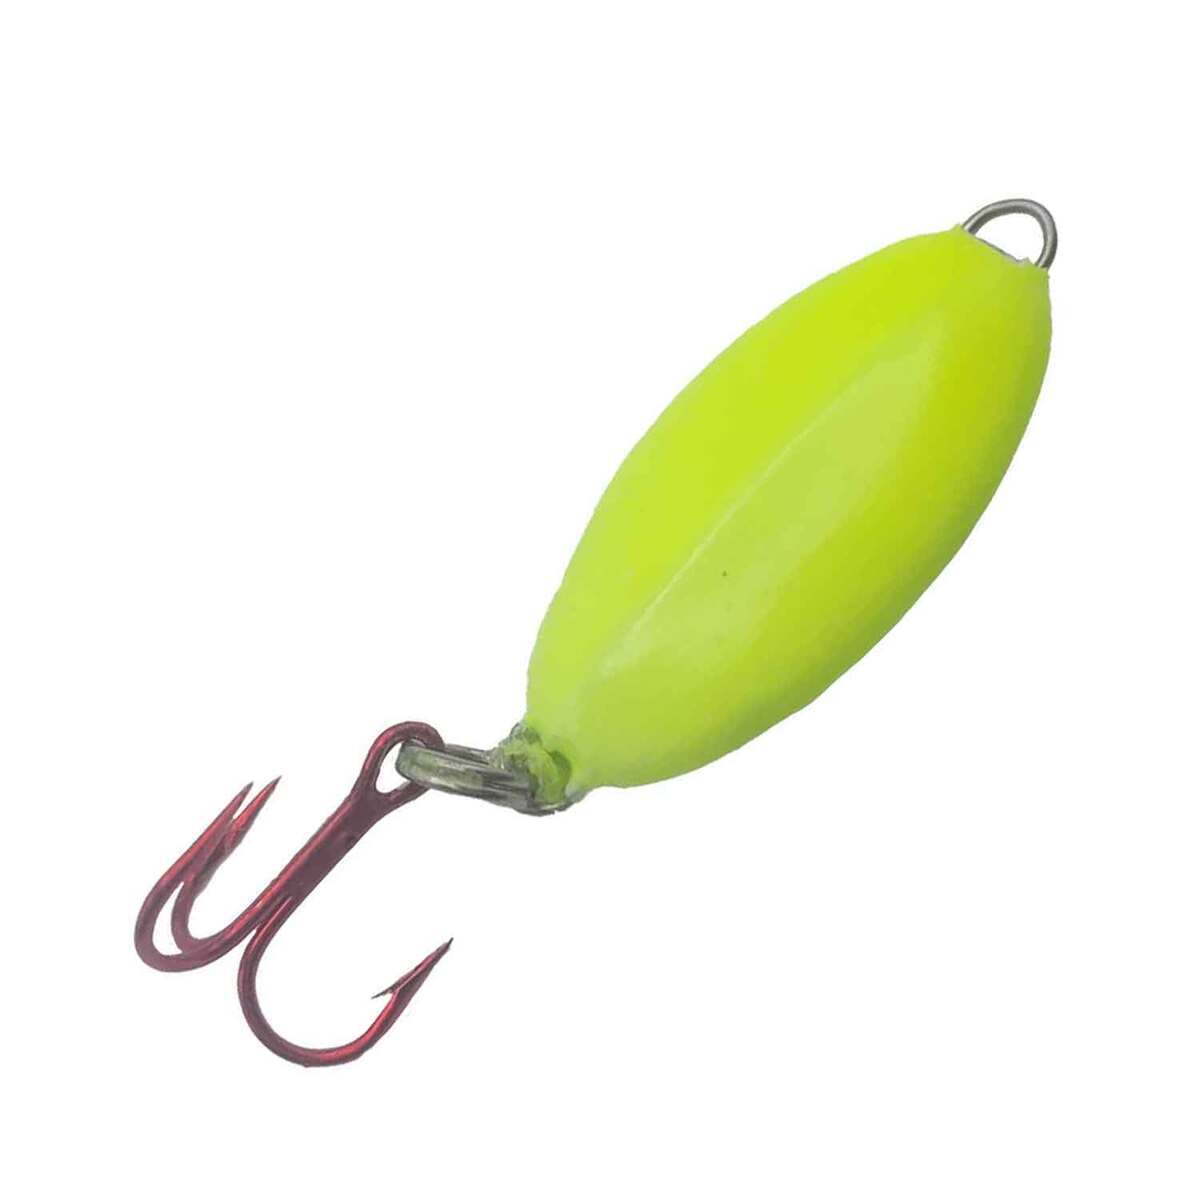  AOKLEY Fishing Hook Handmade Assisthook for Spoon Bait Fishing  Hooks Stream Hard Bait Fishing Tackle Trout Hook Fishing Kit (Color : 1,  Size : 5#) : Sports & Outdoors